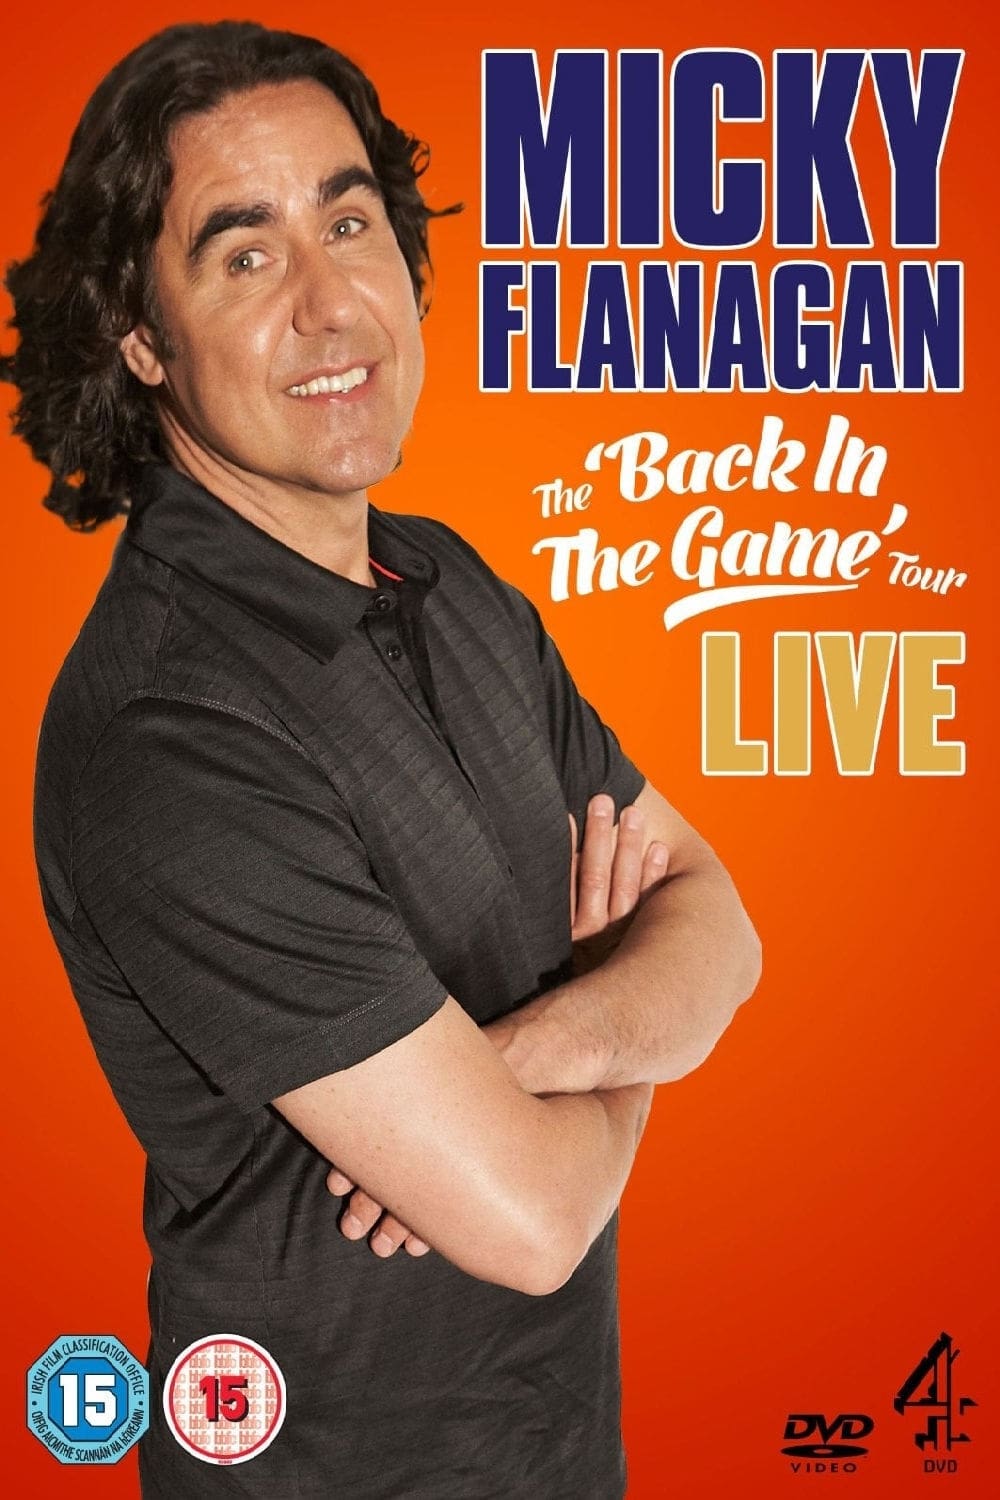 Micky Flanagan Live Back In The Game Tour The Poster